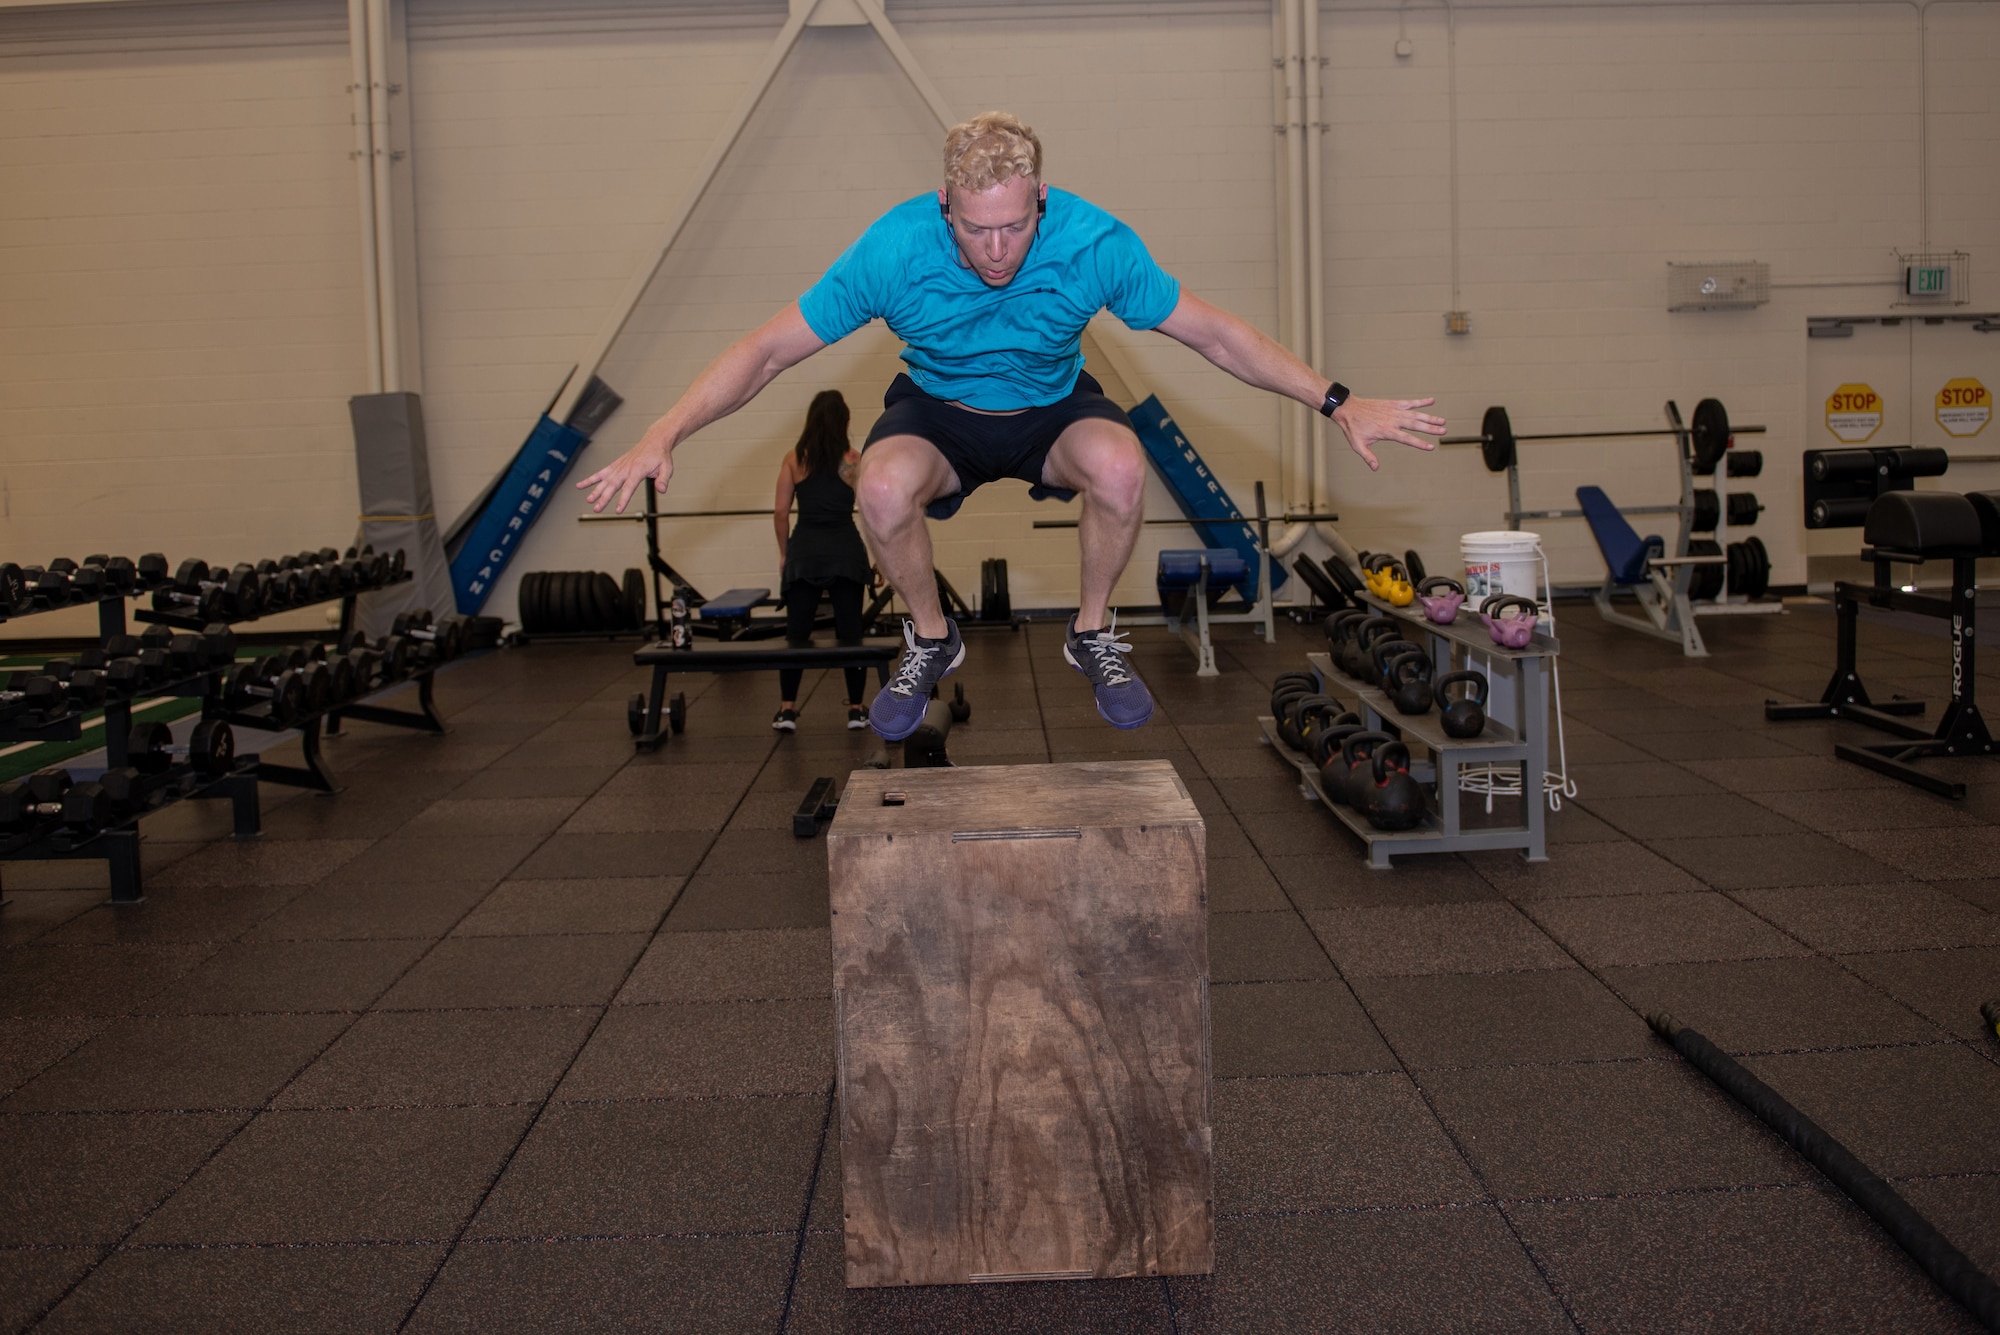 U.S. Air Force Capt. Christopher Williston, a 21st Airlift Squadron C-17 Globemaster III pilot from Baton Rouge, Louisiana, performs box jumps during a workout June 13, 2019, at Travis Air Force Base, California. Williston is training to compete in the Alpha Warrior Western Regional Competition June 21 at Hill AFB, Utah. (U.S. Air Force photo by Tech. Sgt. James Hodgman)